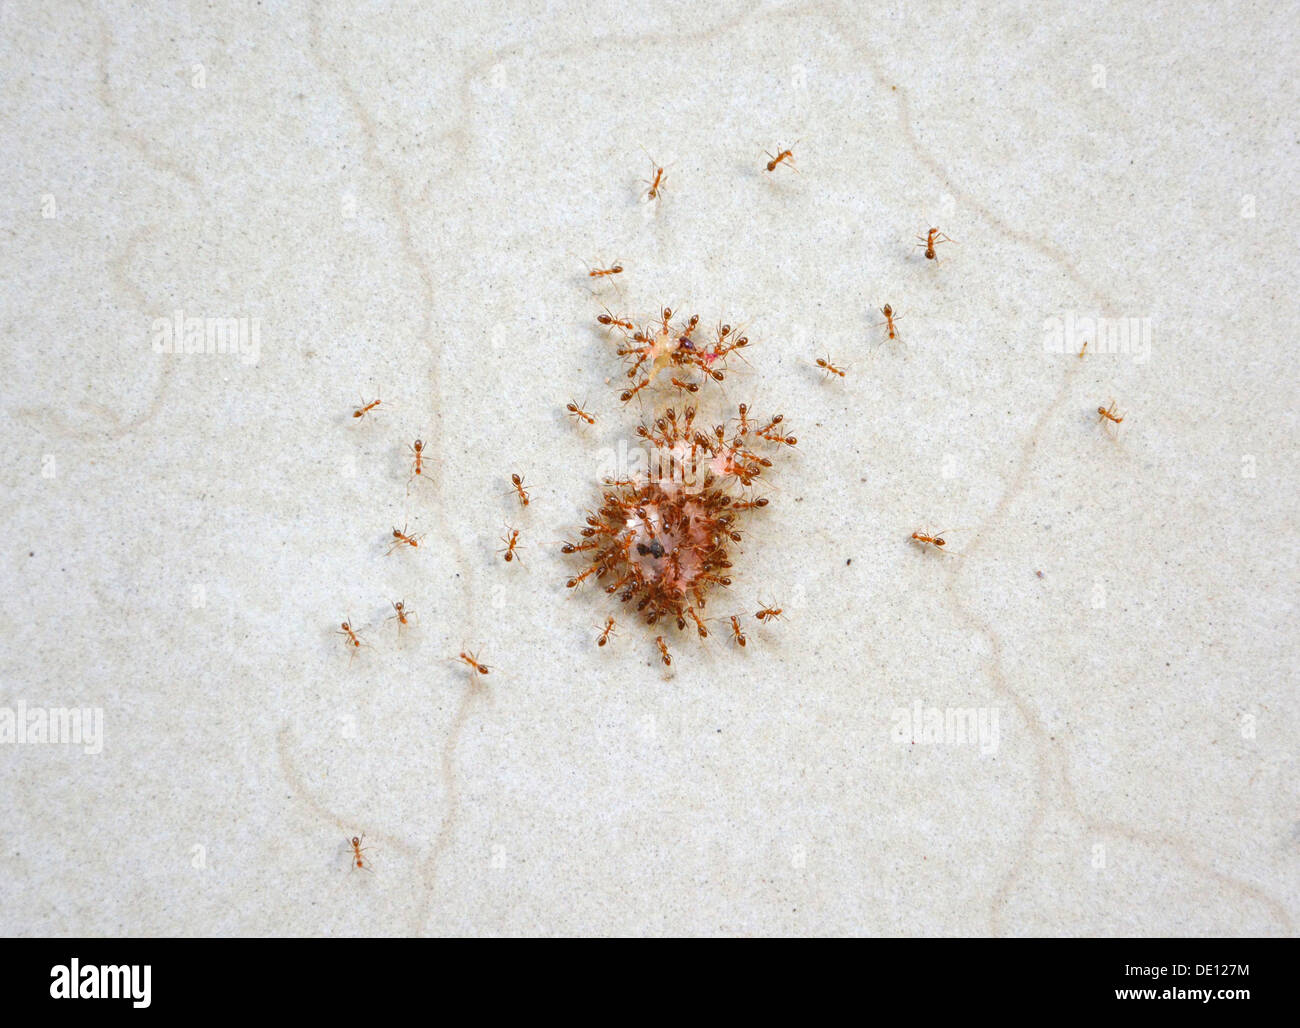 Crazy ants trying to carry food Stock Photo